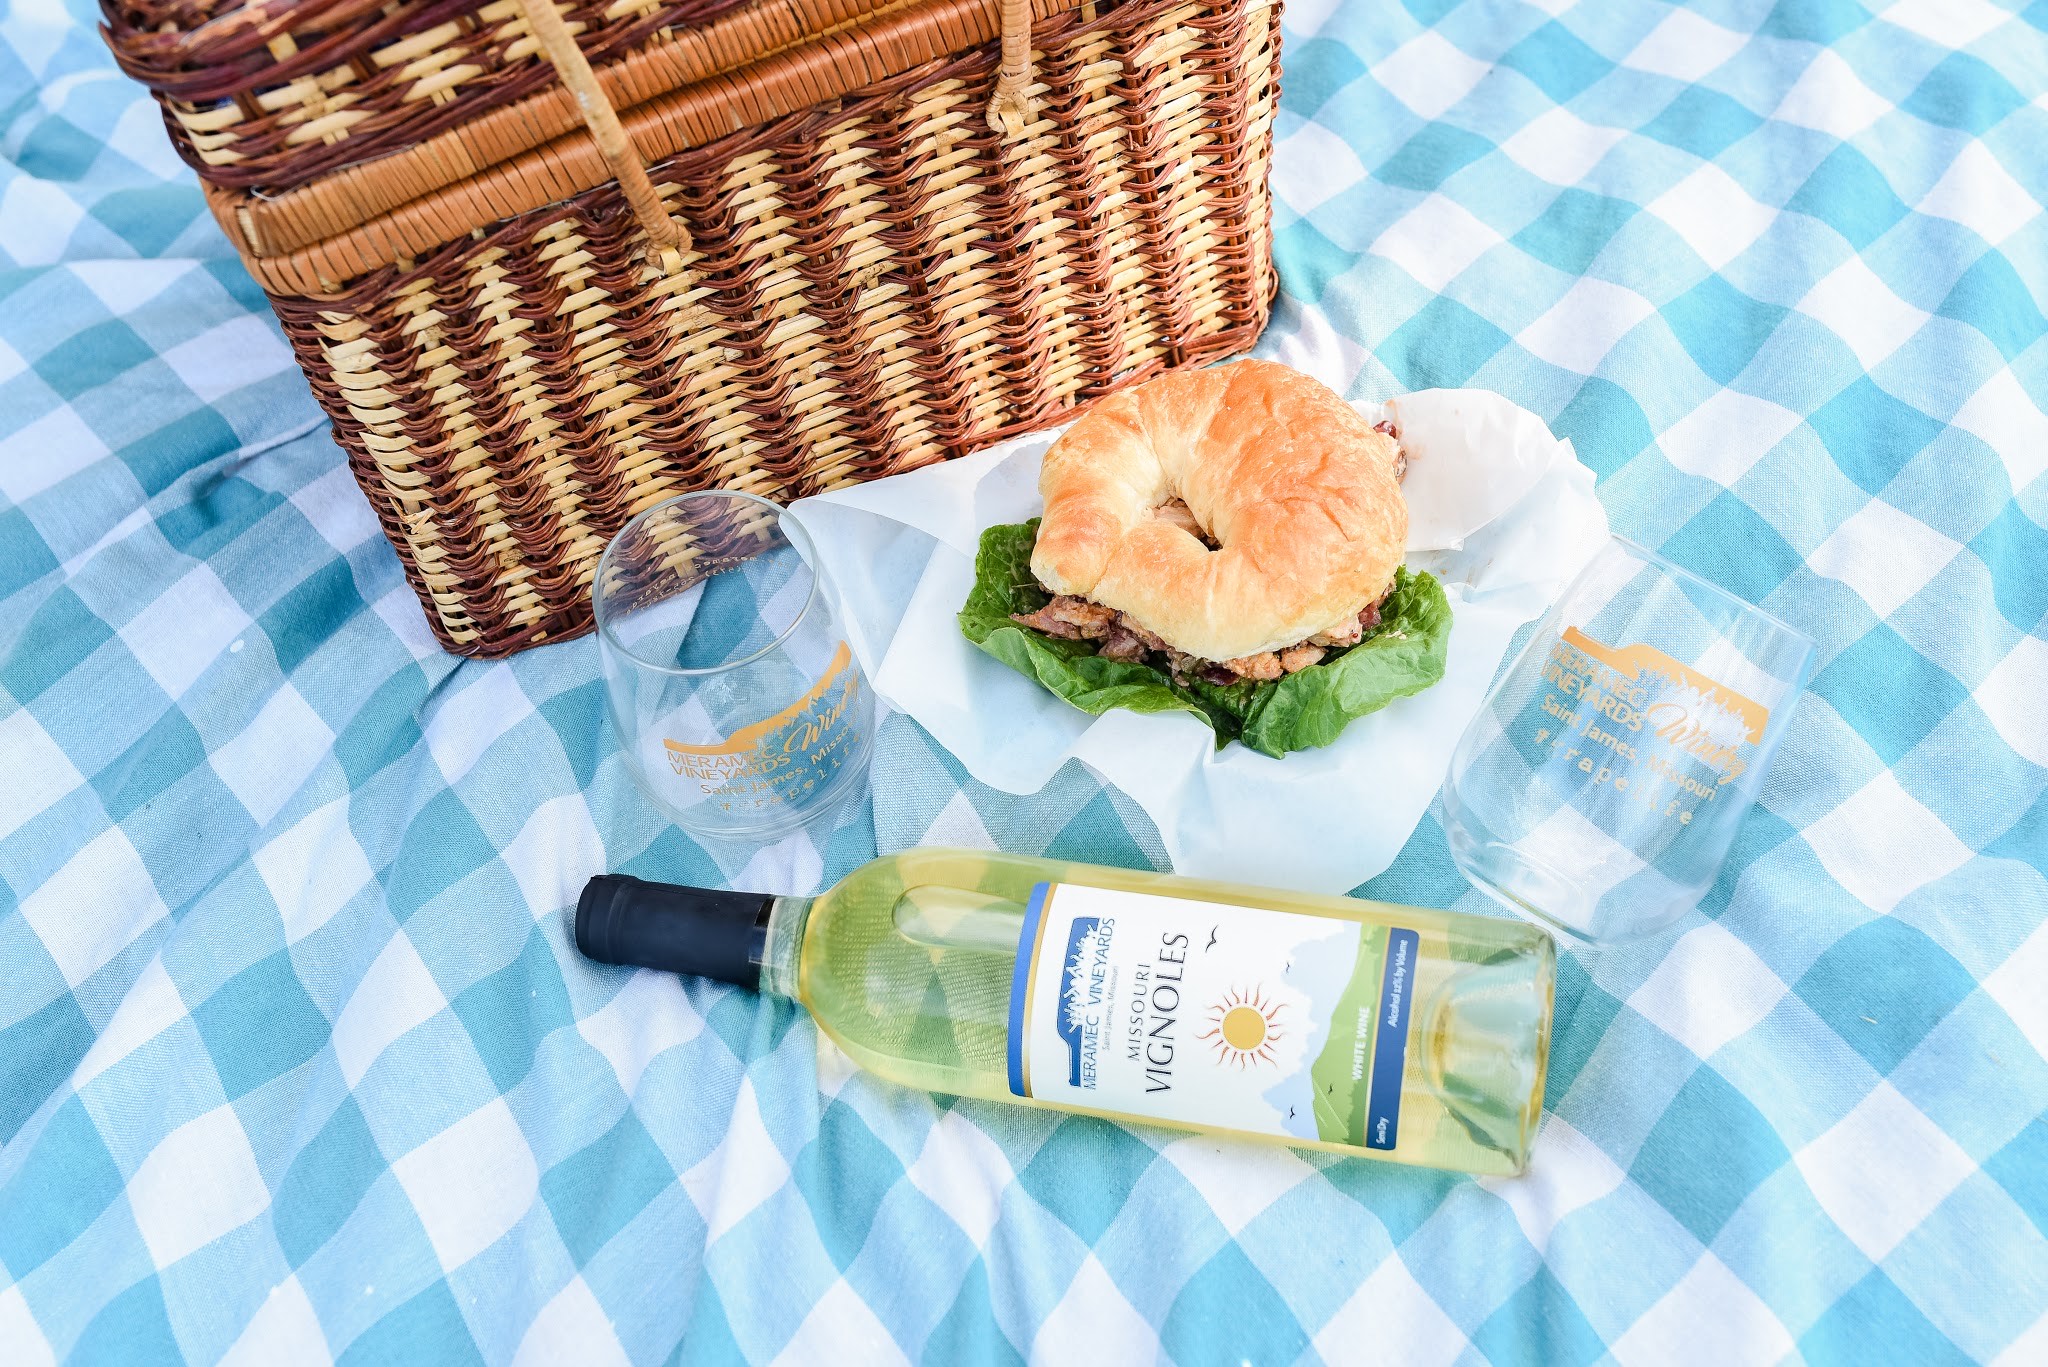 Meramec Vineyards Winery - a blue and white checkered tablecloth with a picnic basket, wine bottle, wine glass, and sandwich on it.